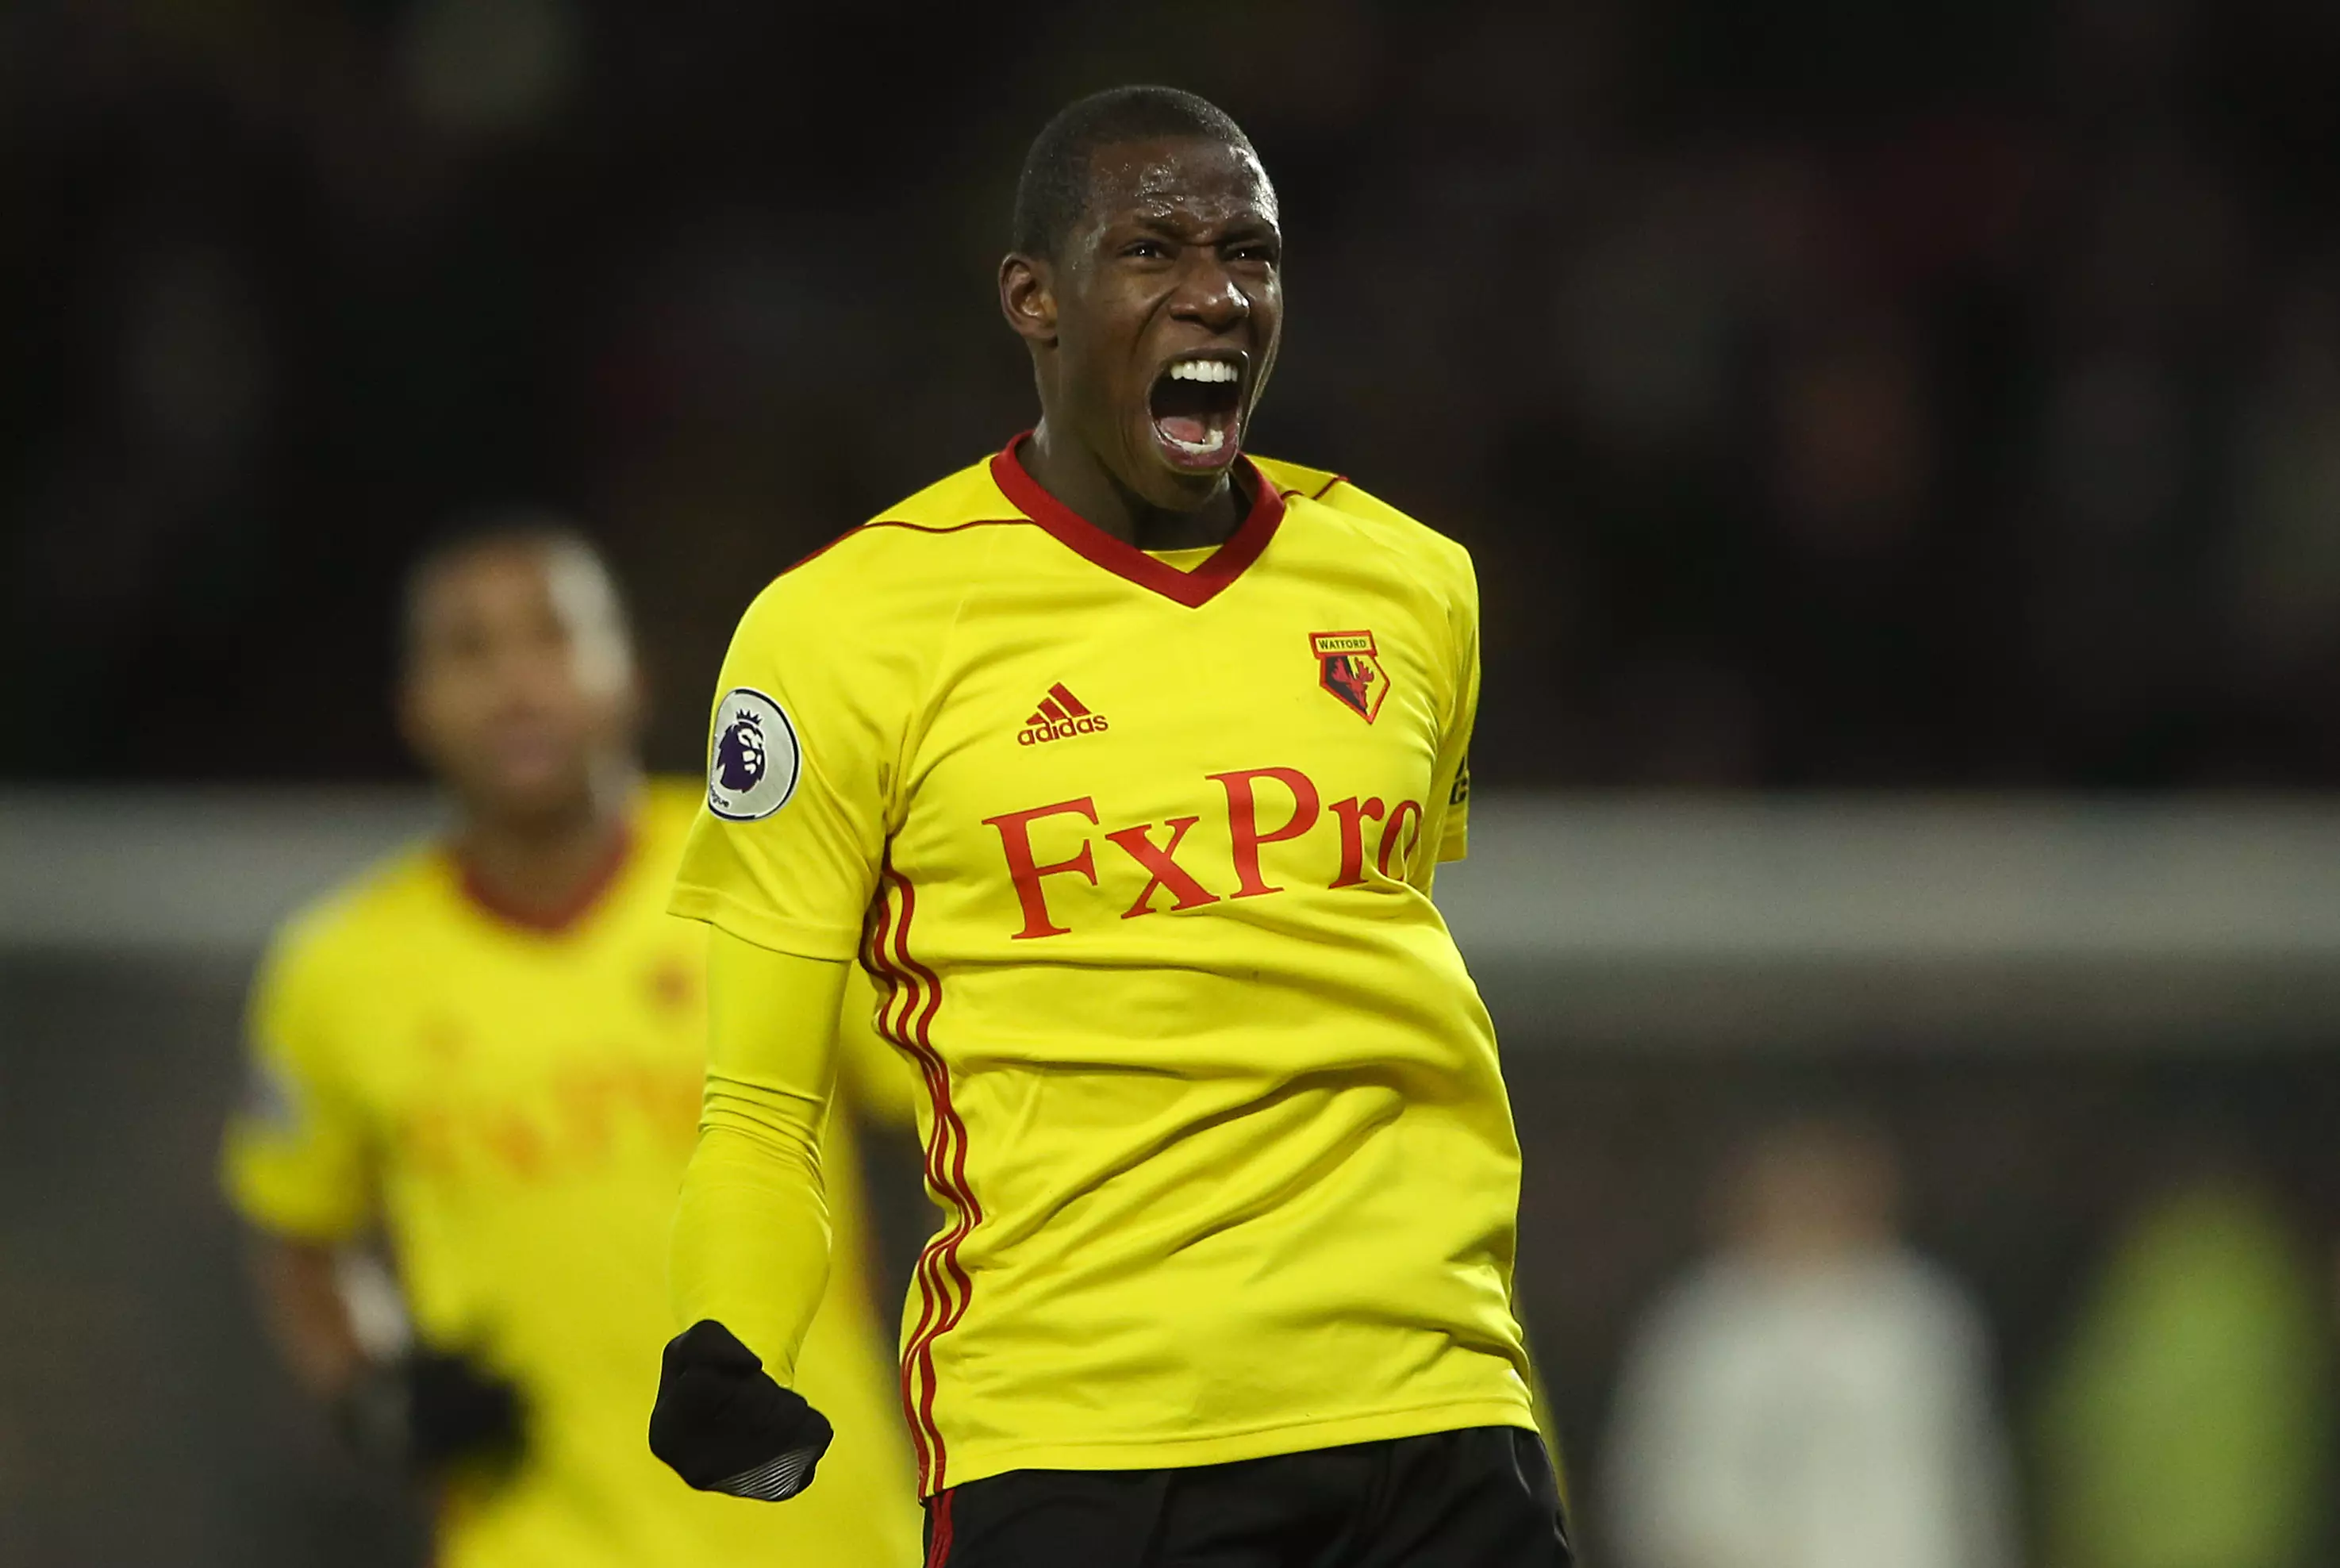 Could Doucoure be on his way to one of the Premier League big boys? Image: PA Images